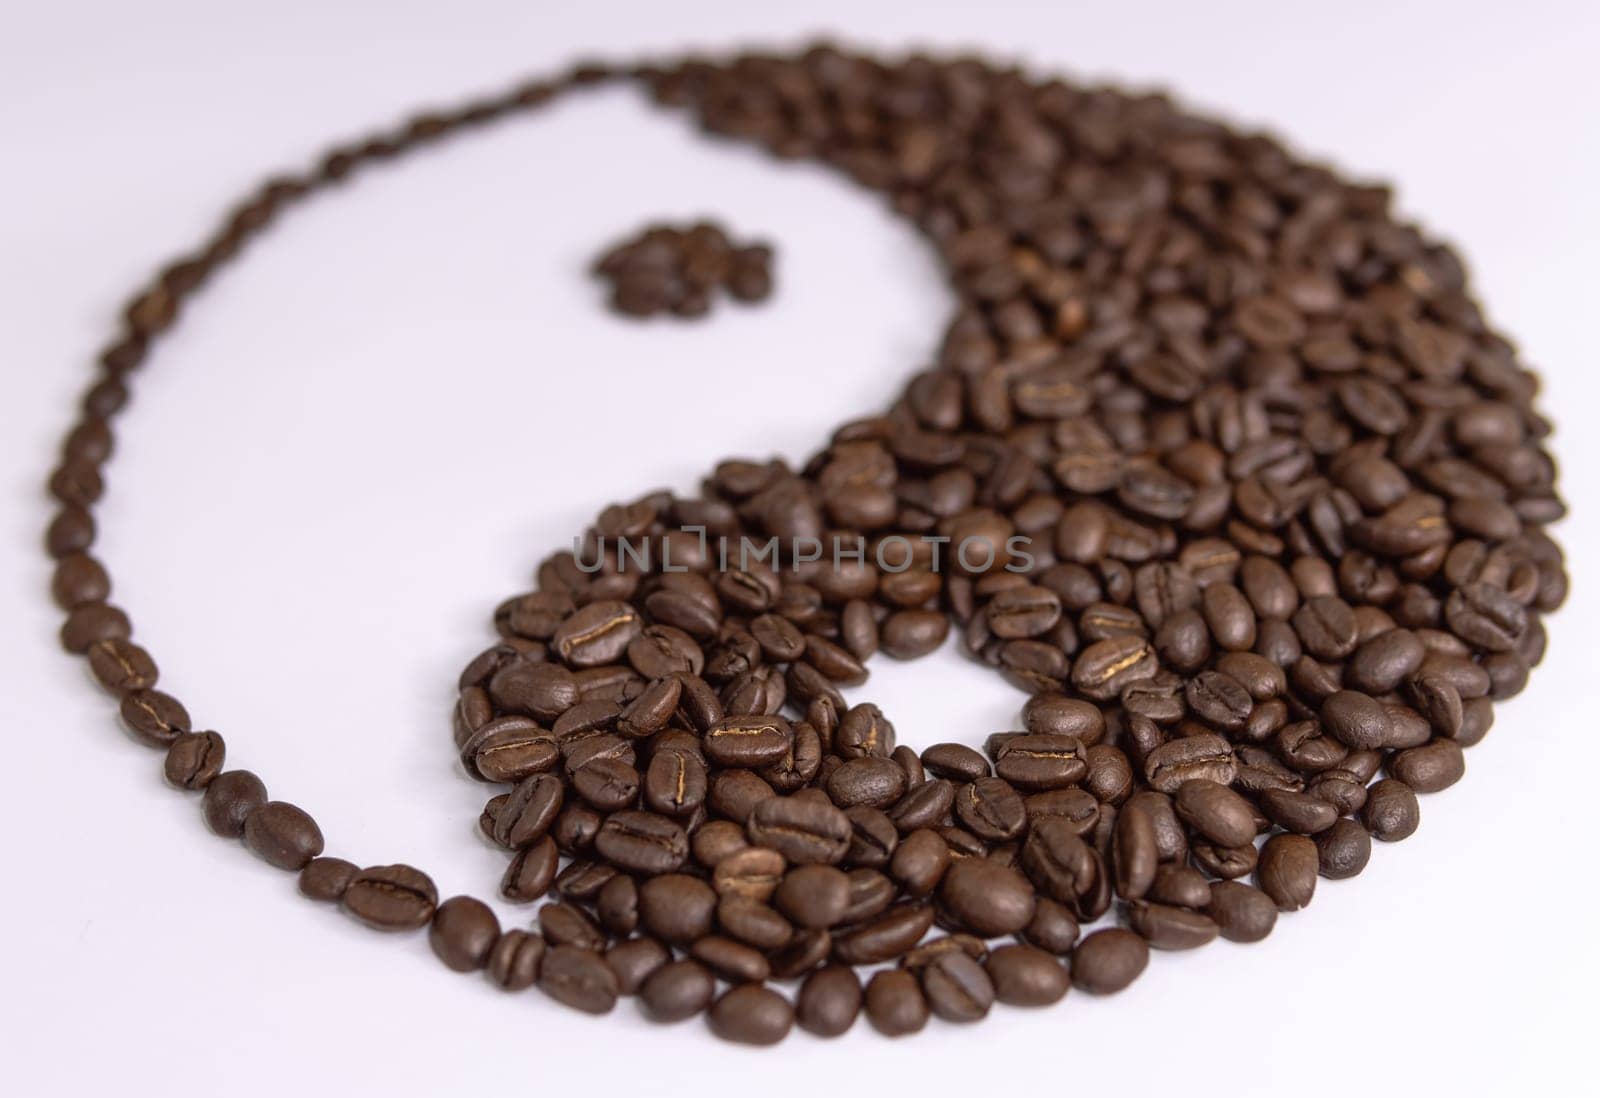 yin yang sign made by coffee beans on white background by PopOff